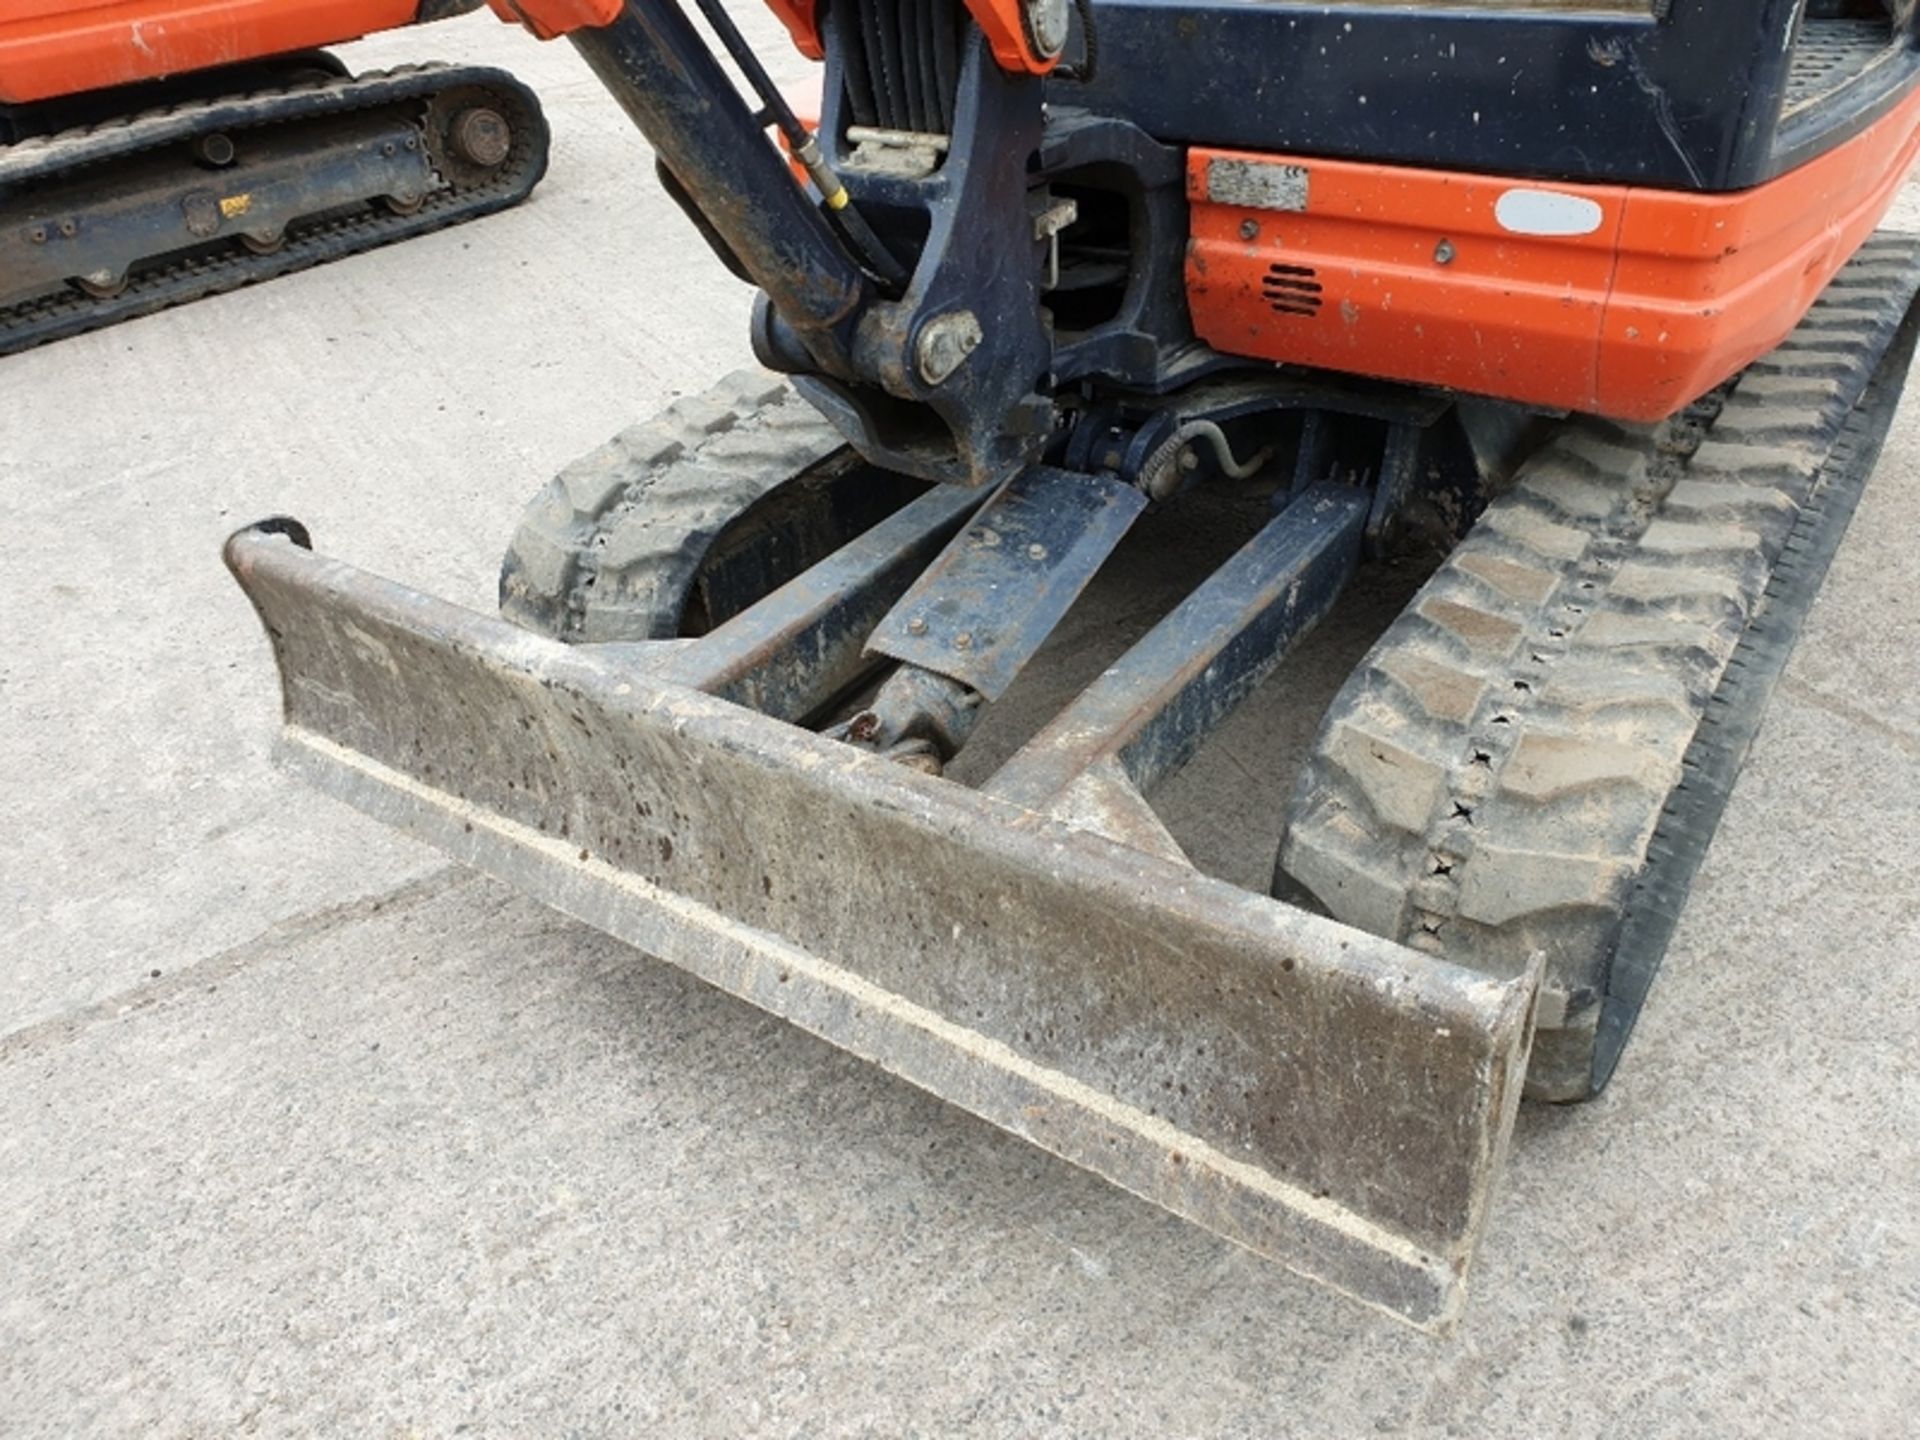 2015 KUBOTA KX61-3 MINI DIGGER, PIPED, BLADE, OFFSET BOOM, RUBBER TRACKS, RED KEY, 3 BUCKETS, SN: - Image 5 of 9